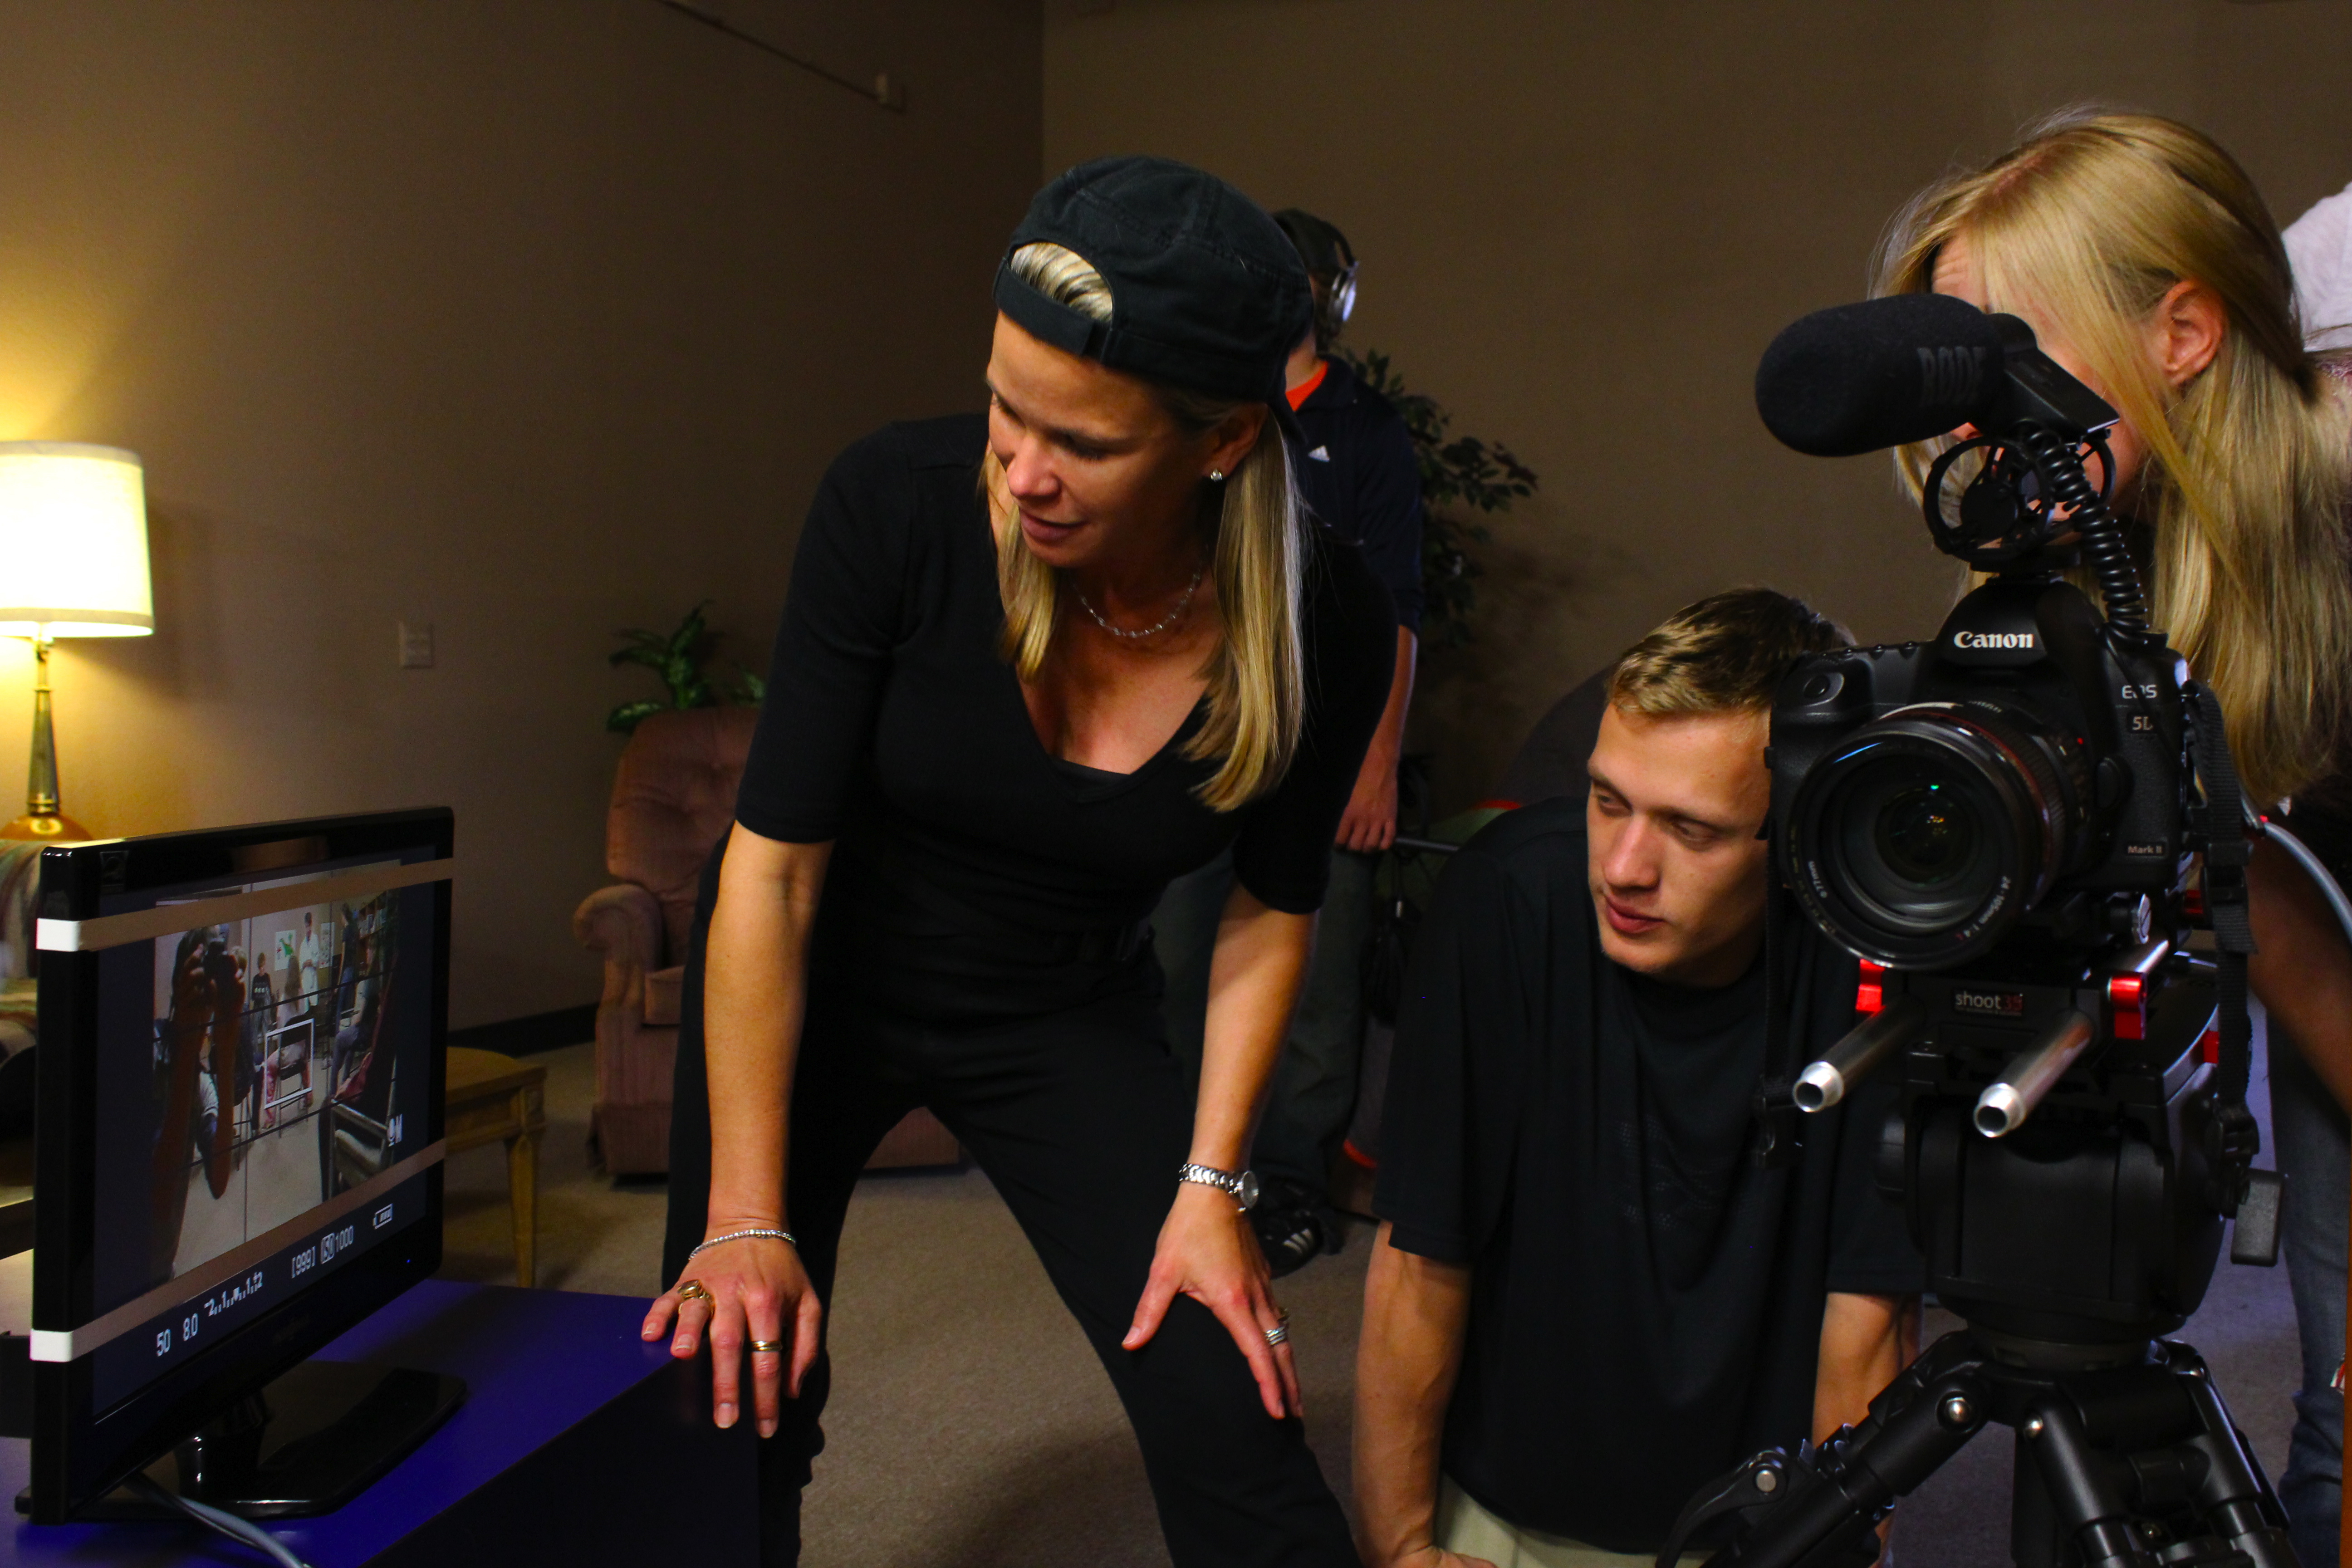 On Set: Anger Management with Connor Thorp, Sound Recordist and Katie Anderies, Script Supervisor